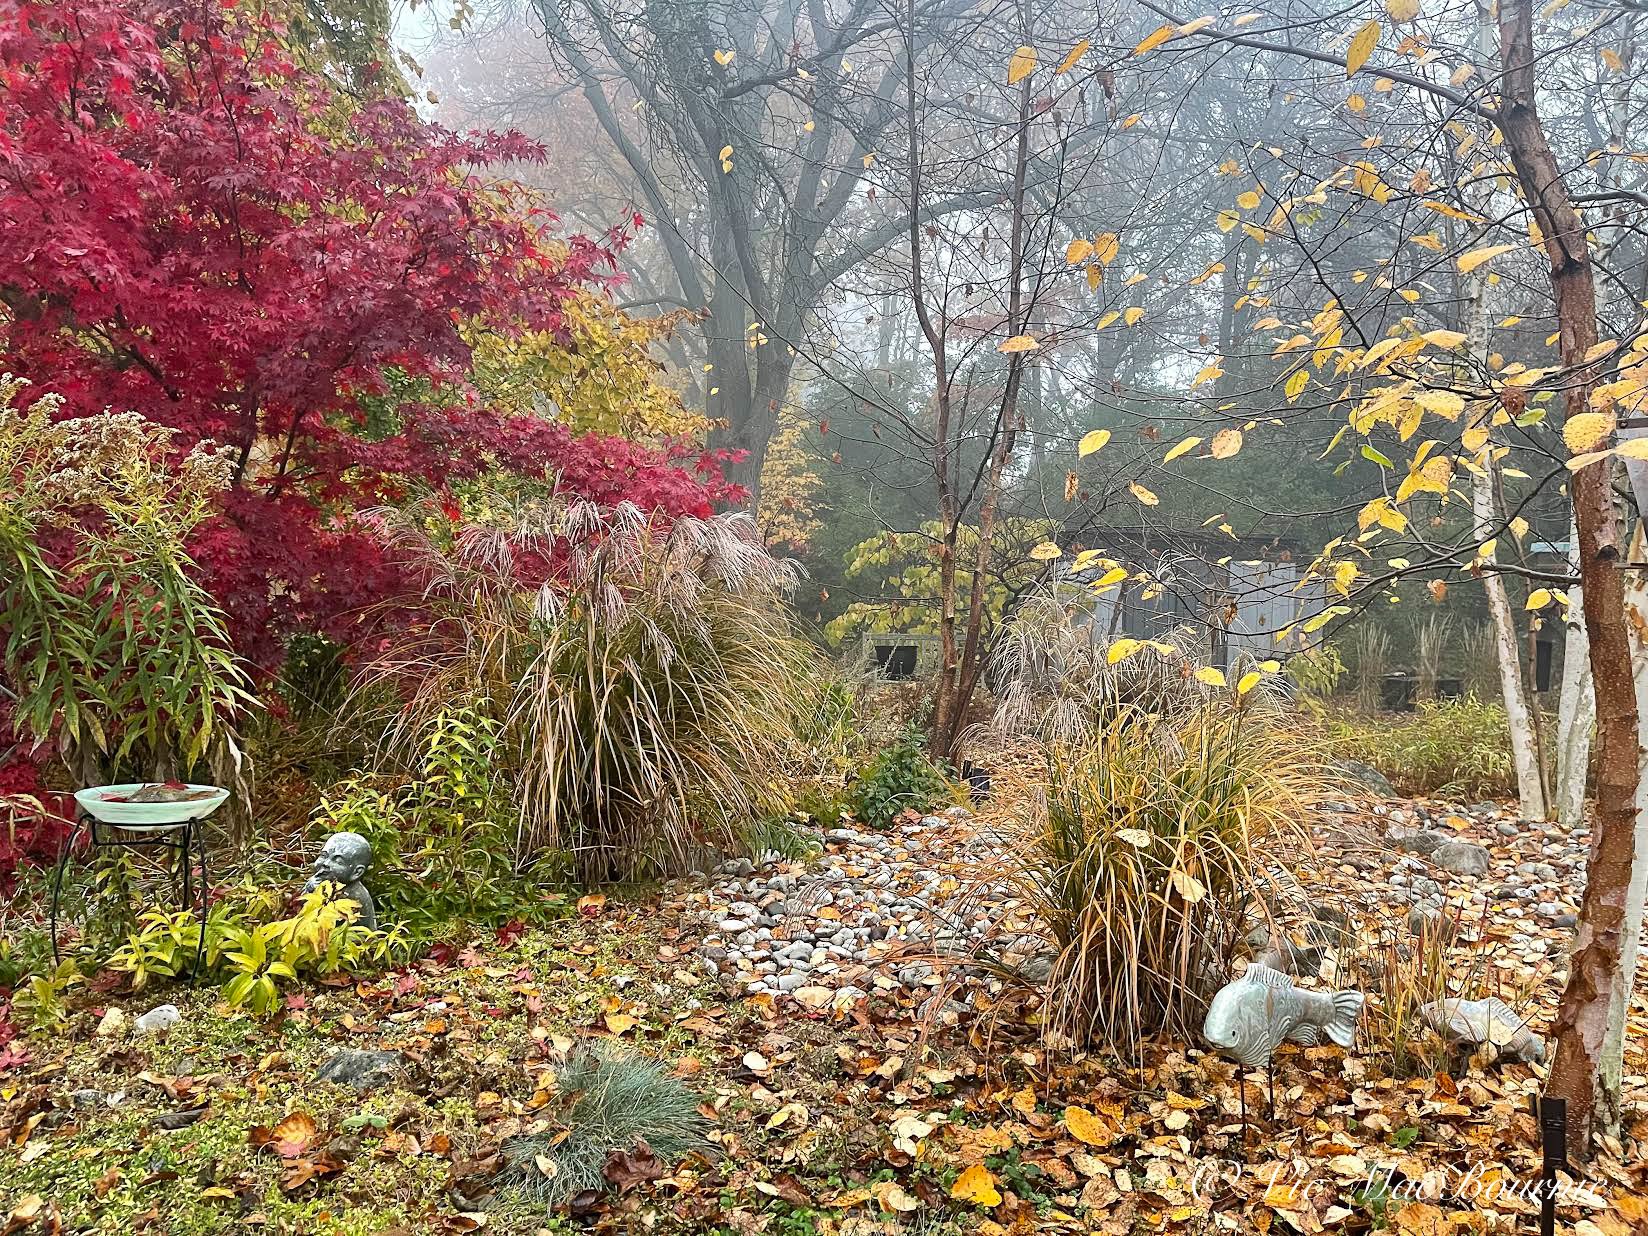 Iphone 12 pro max image of woodland garden in fog